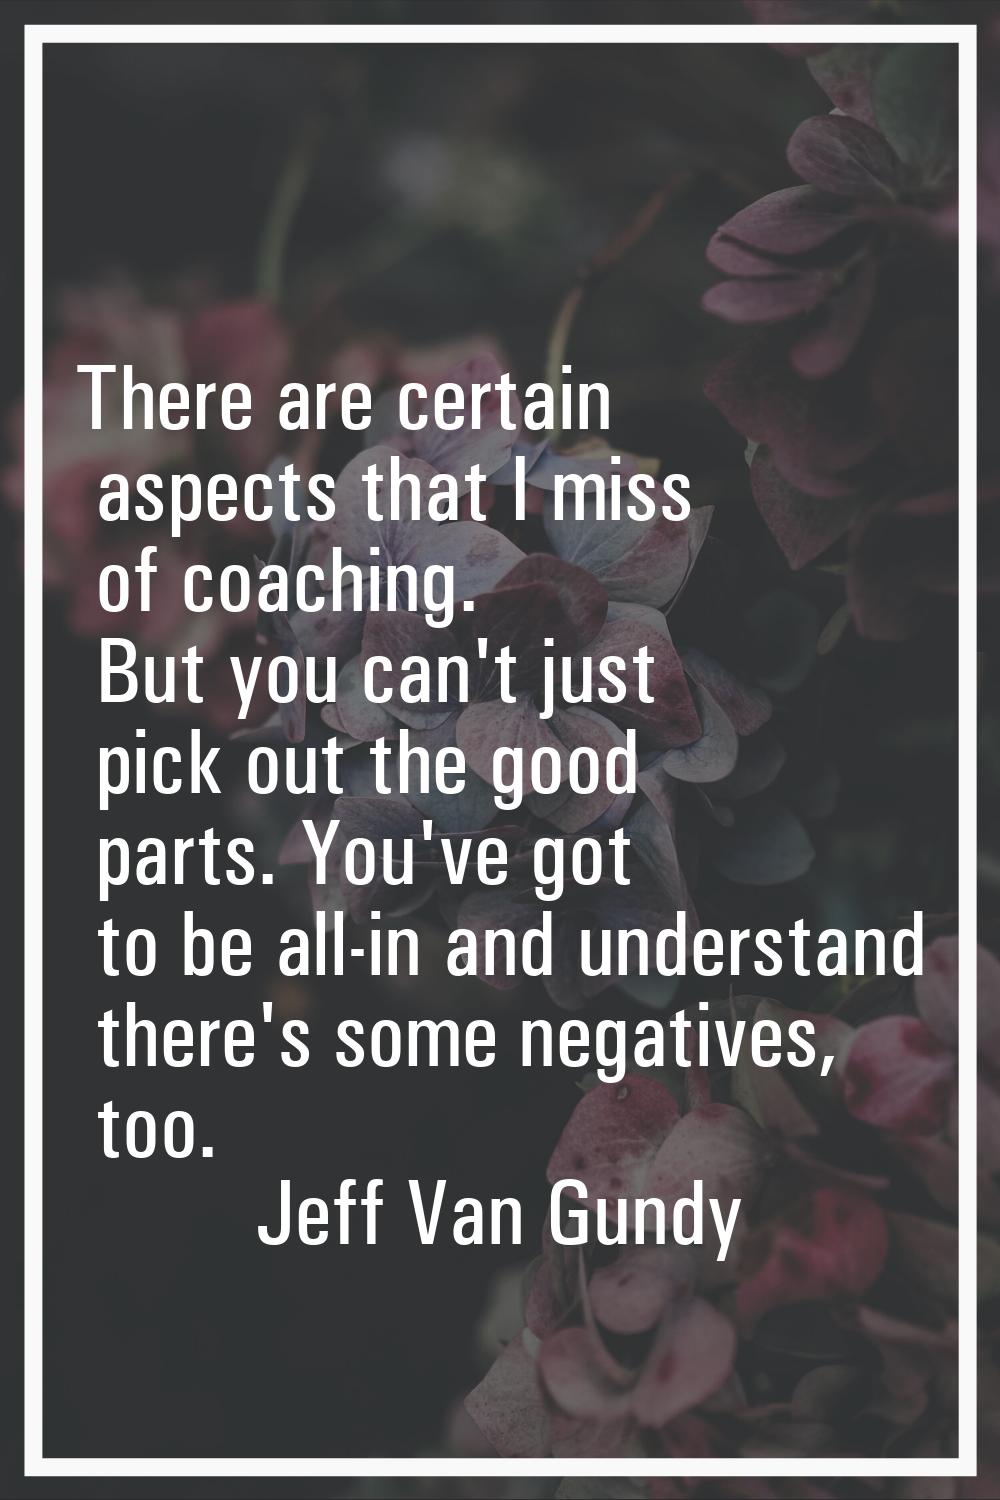 There are certain aspects that I miss of coaching. But you can't just pick out the good parts. You'